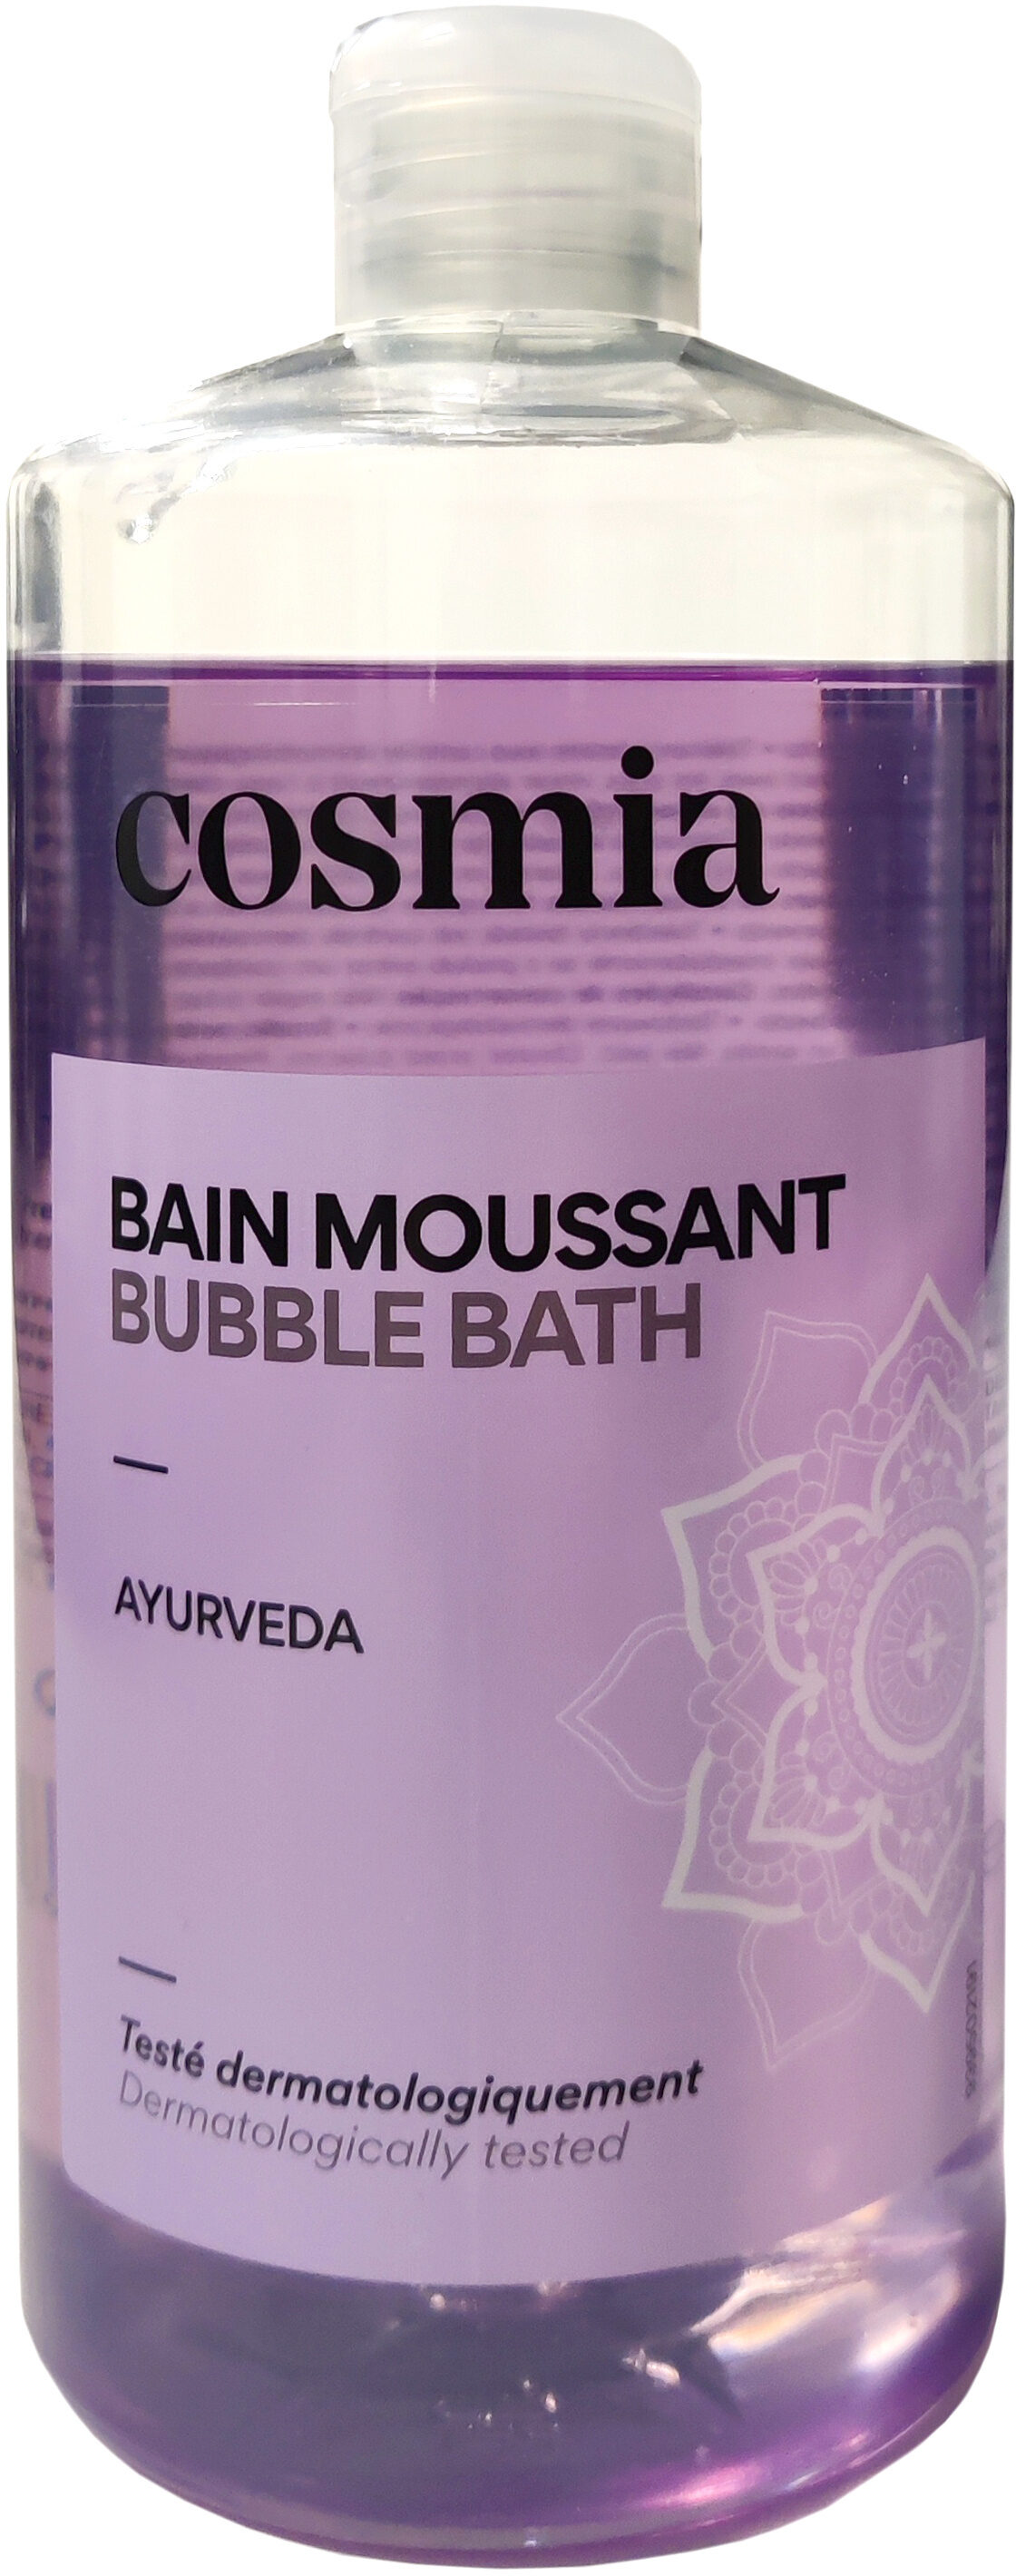 Bain moussant ayurveda - Tuote - fr